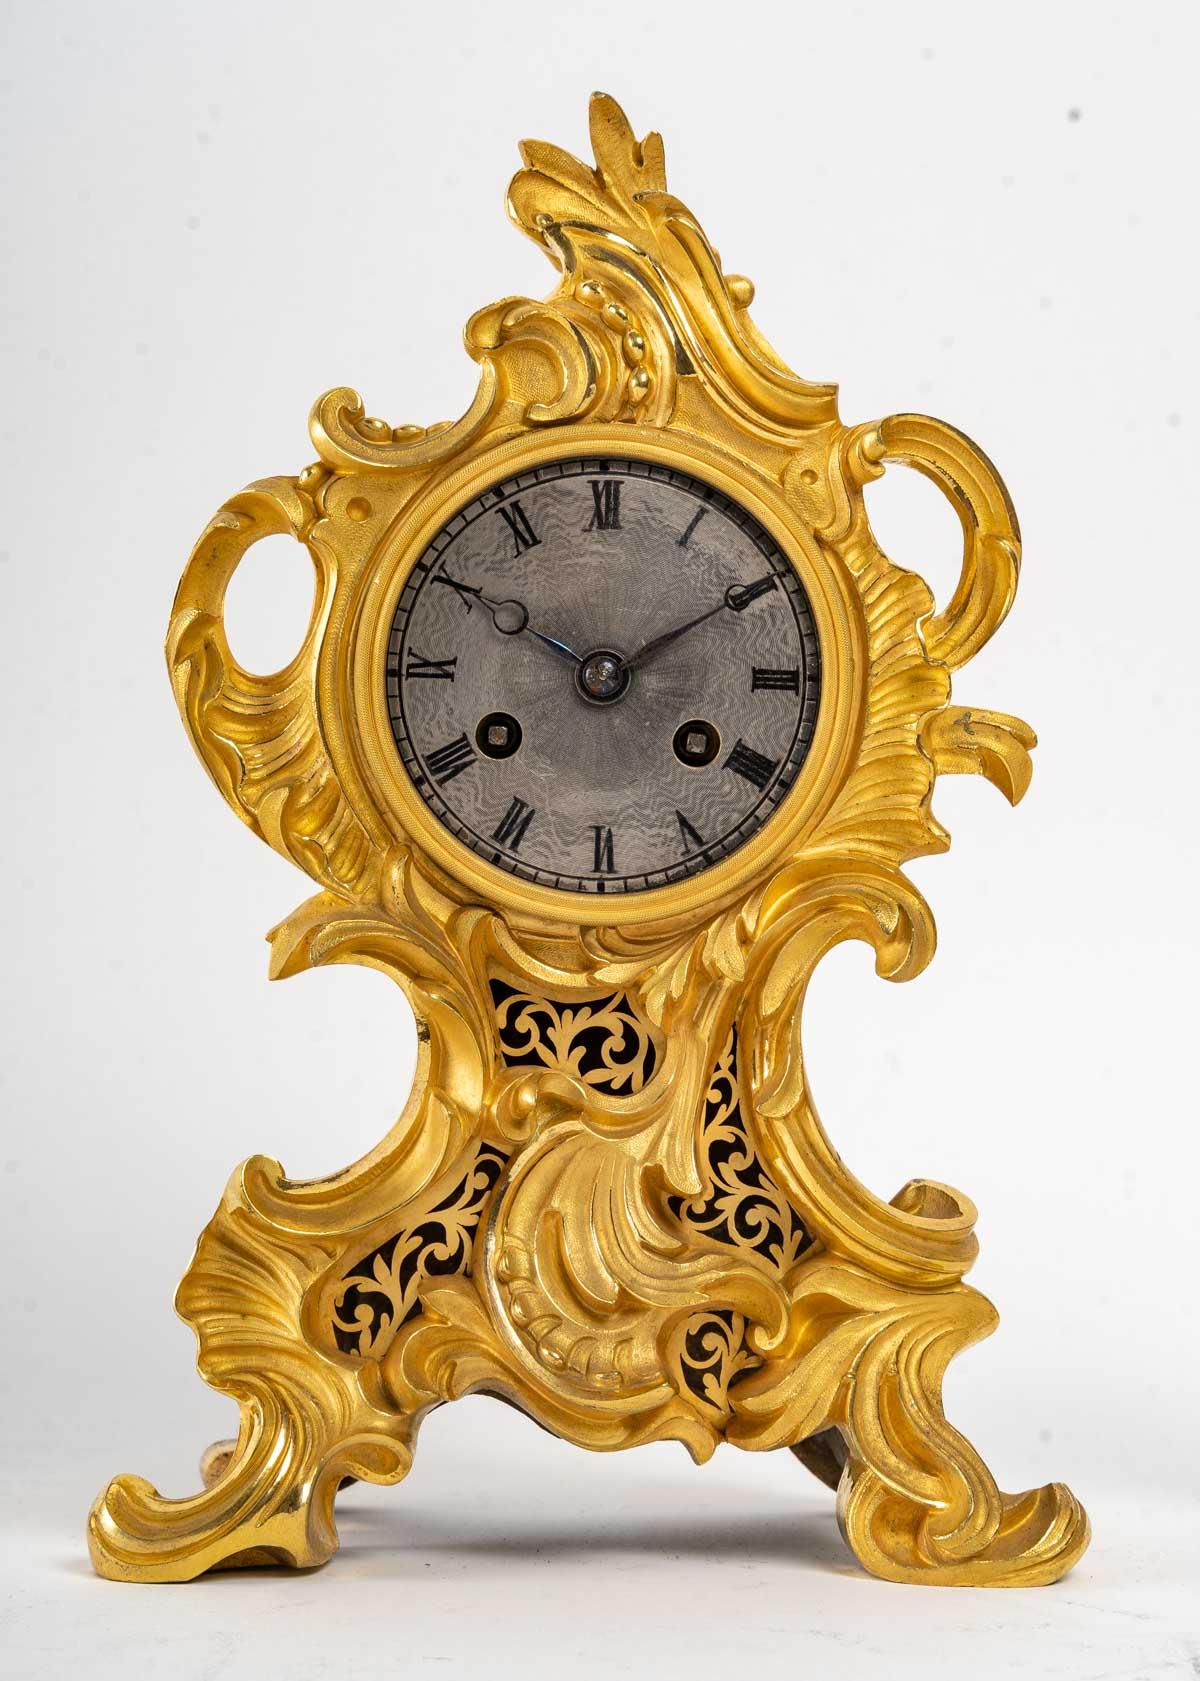 Sublime gilt bronze fireplace trim, finely chiseled and burnished with Agathe.

It consists of a clock resting on four arched feet, with rococo decoration characterized by the fancy of the contoured lines reminiscent of the volutes of seashells